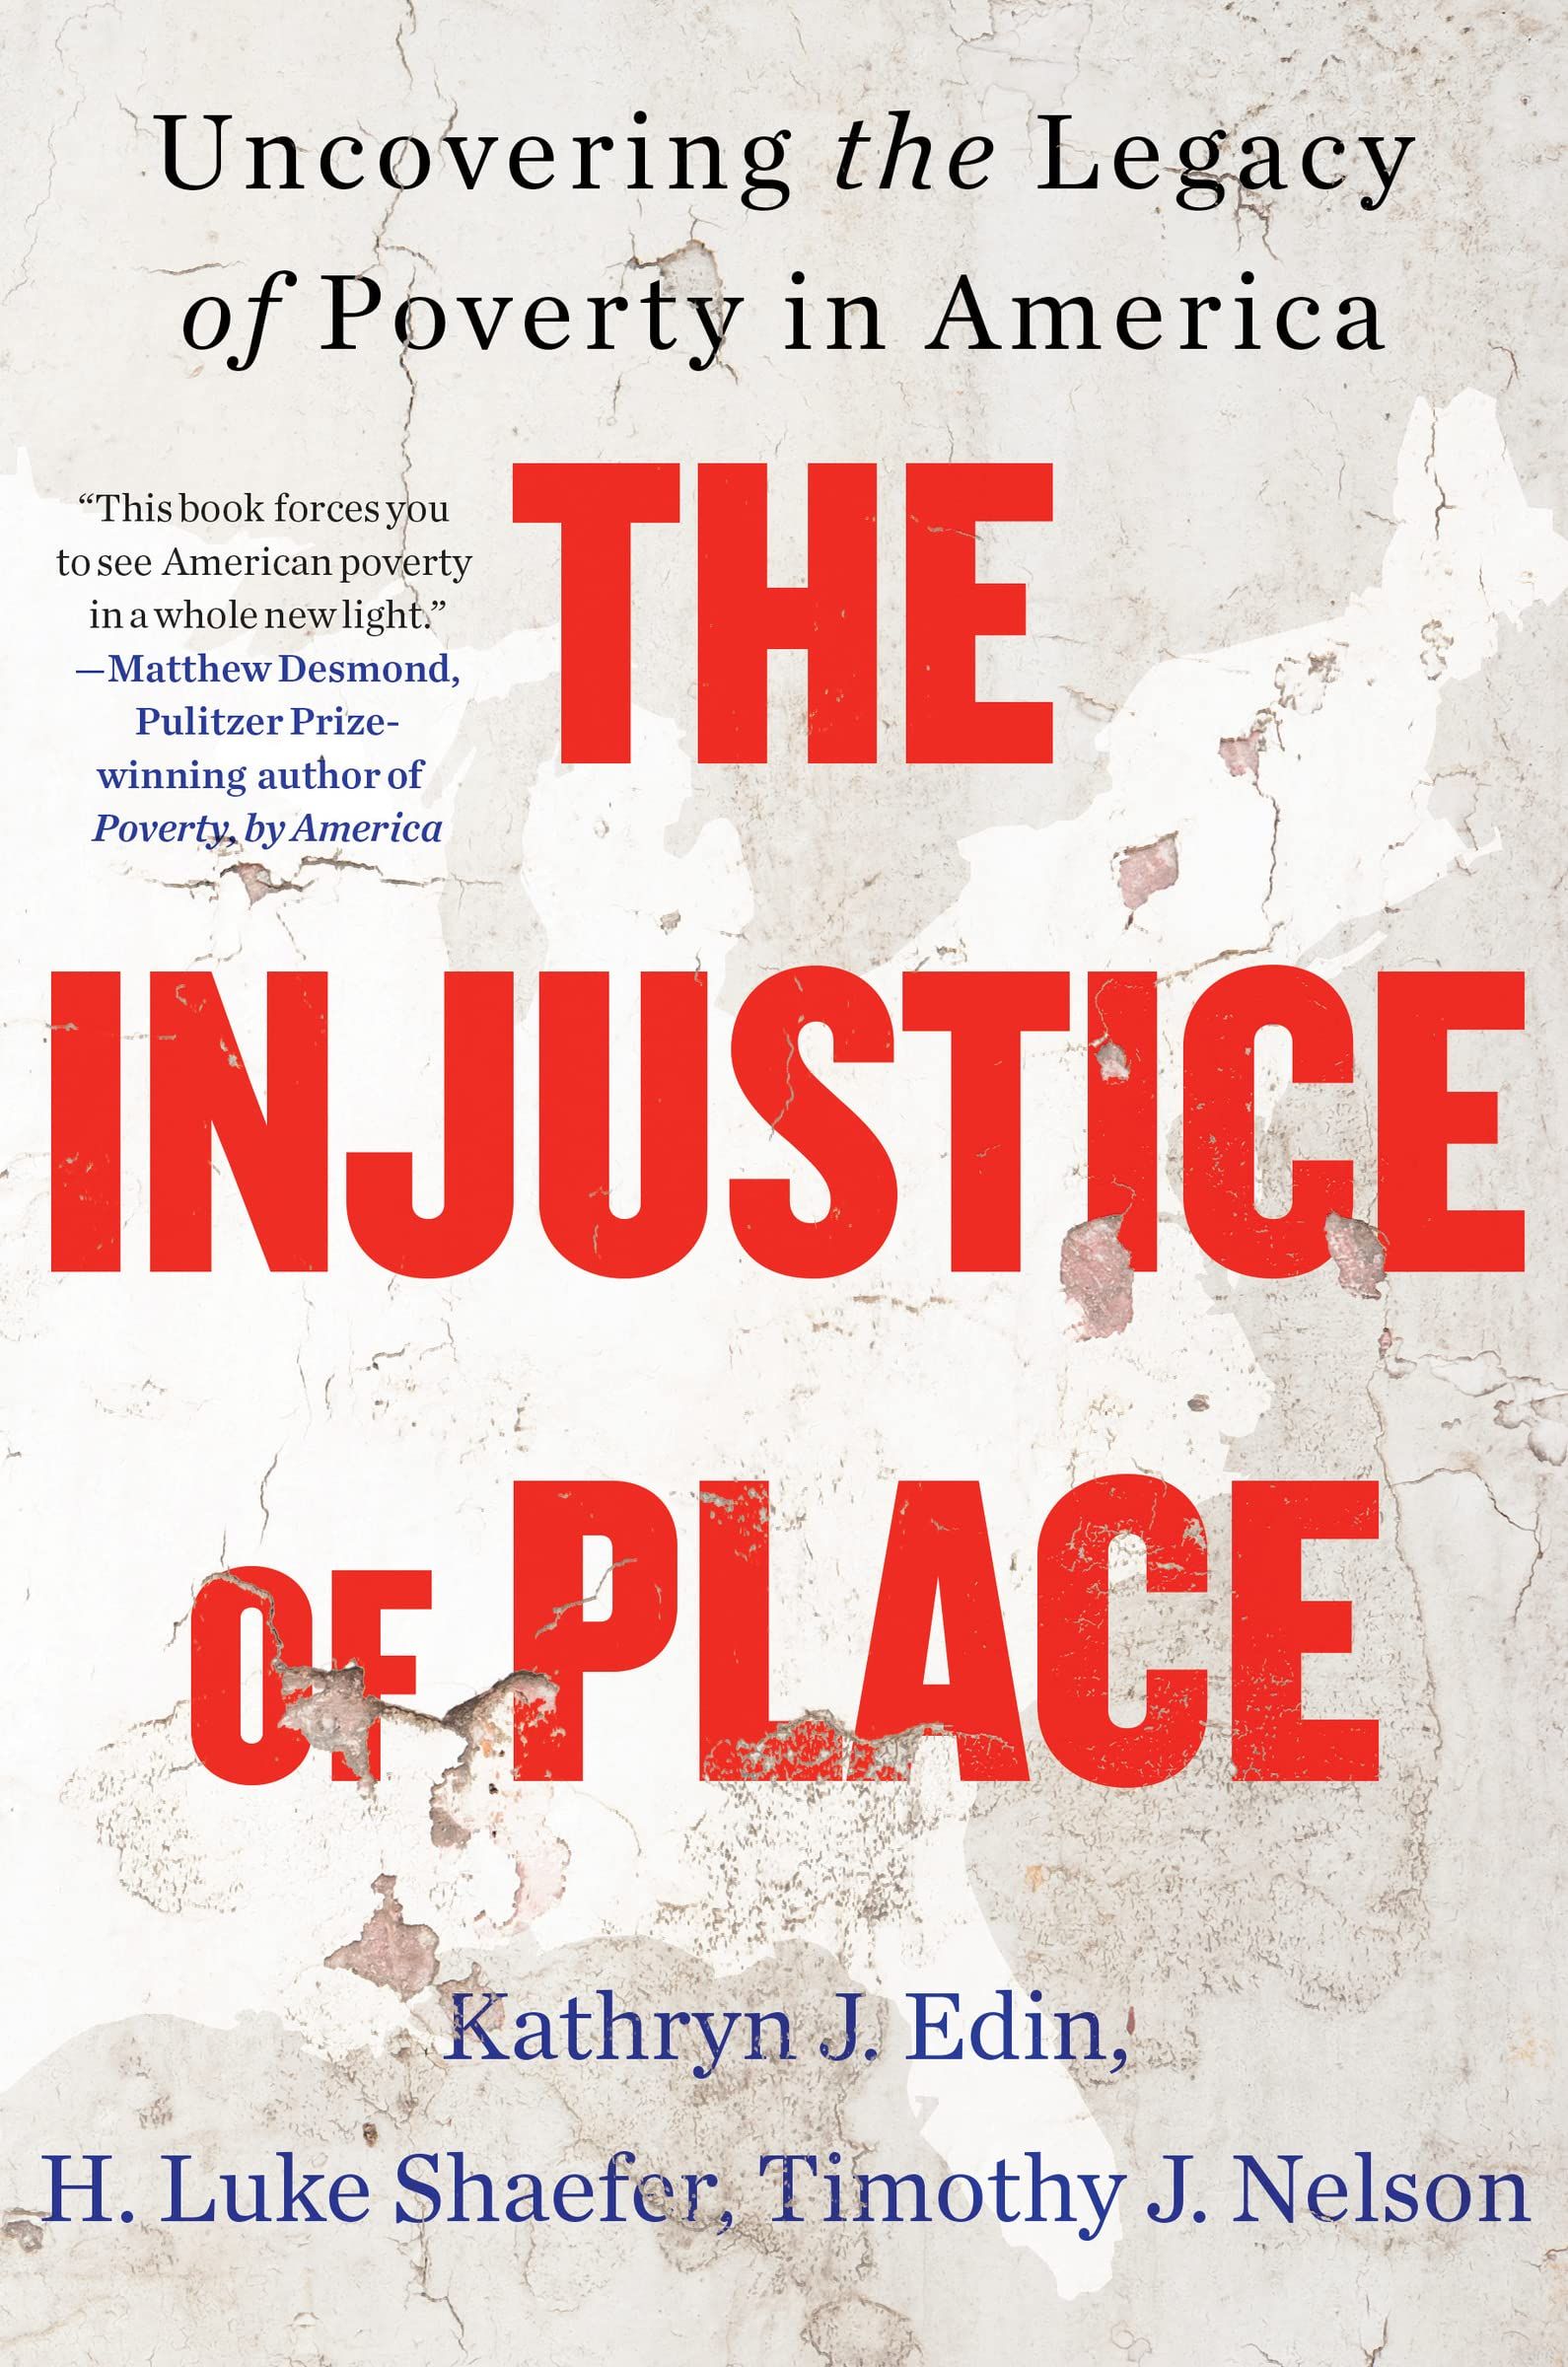 ever of The Injustice of Place: Uncovering the Legacy of Poverty in America 